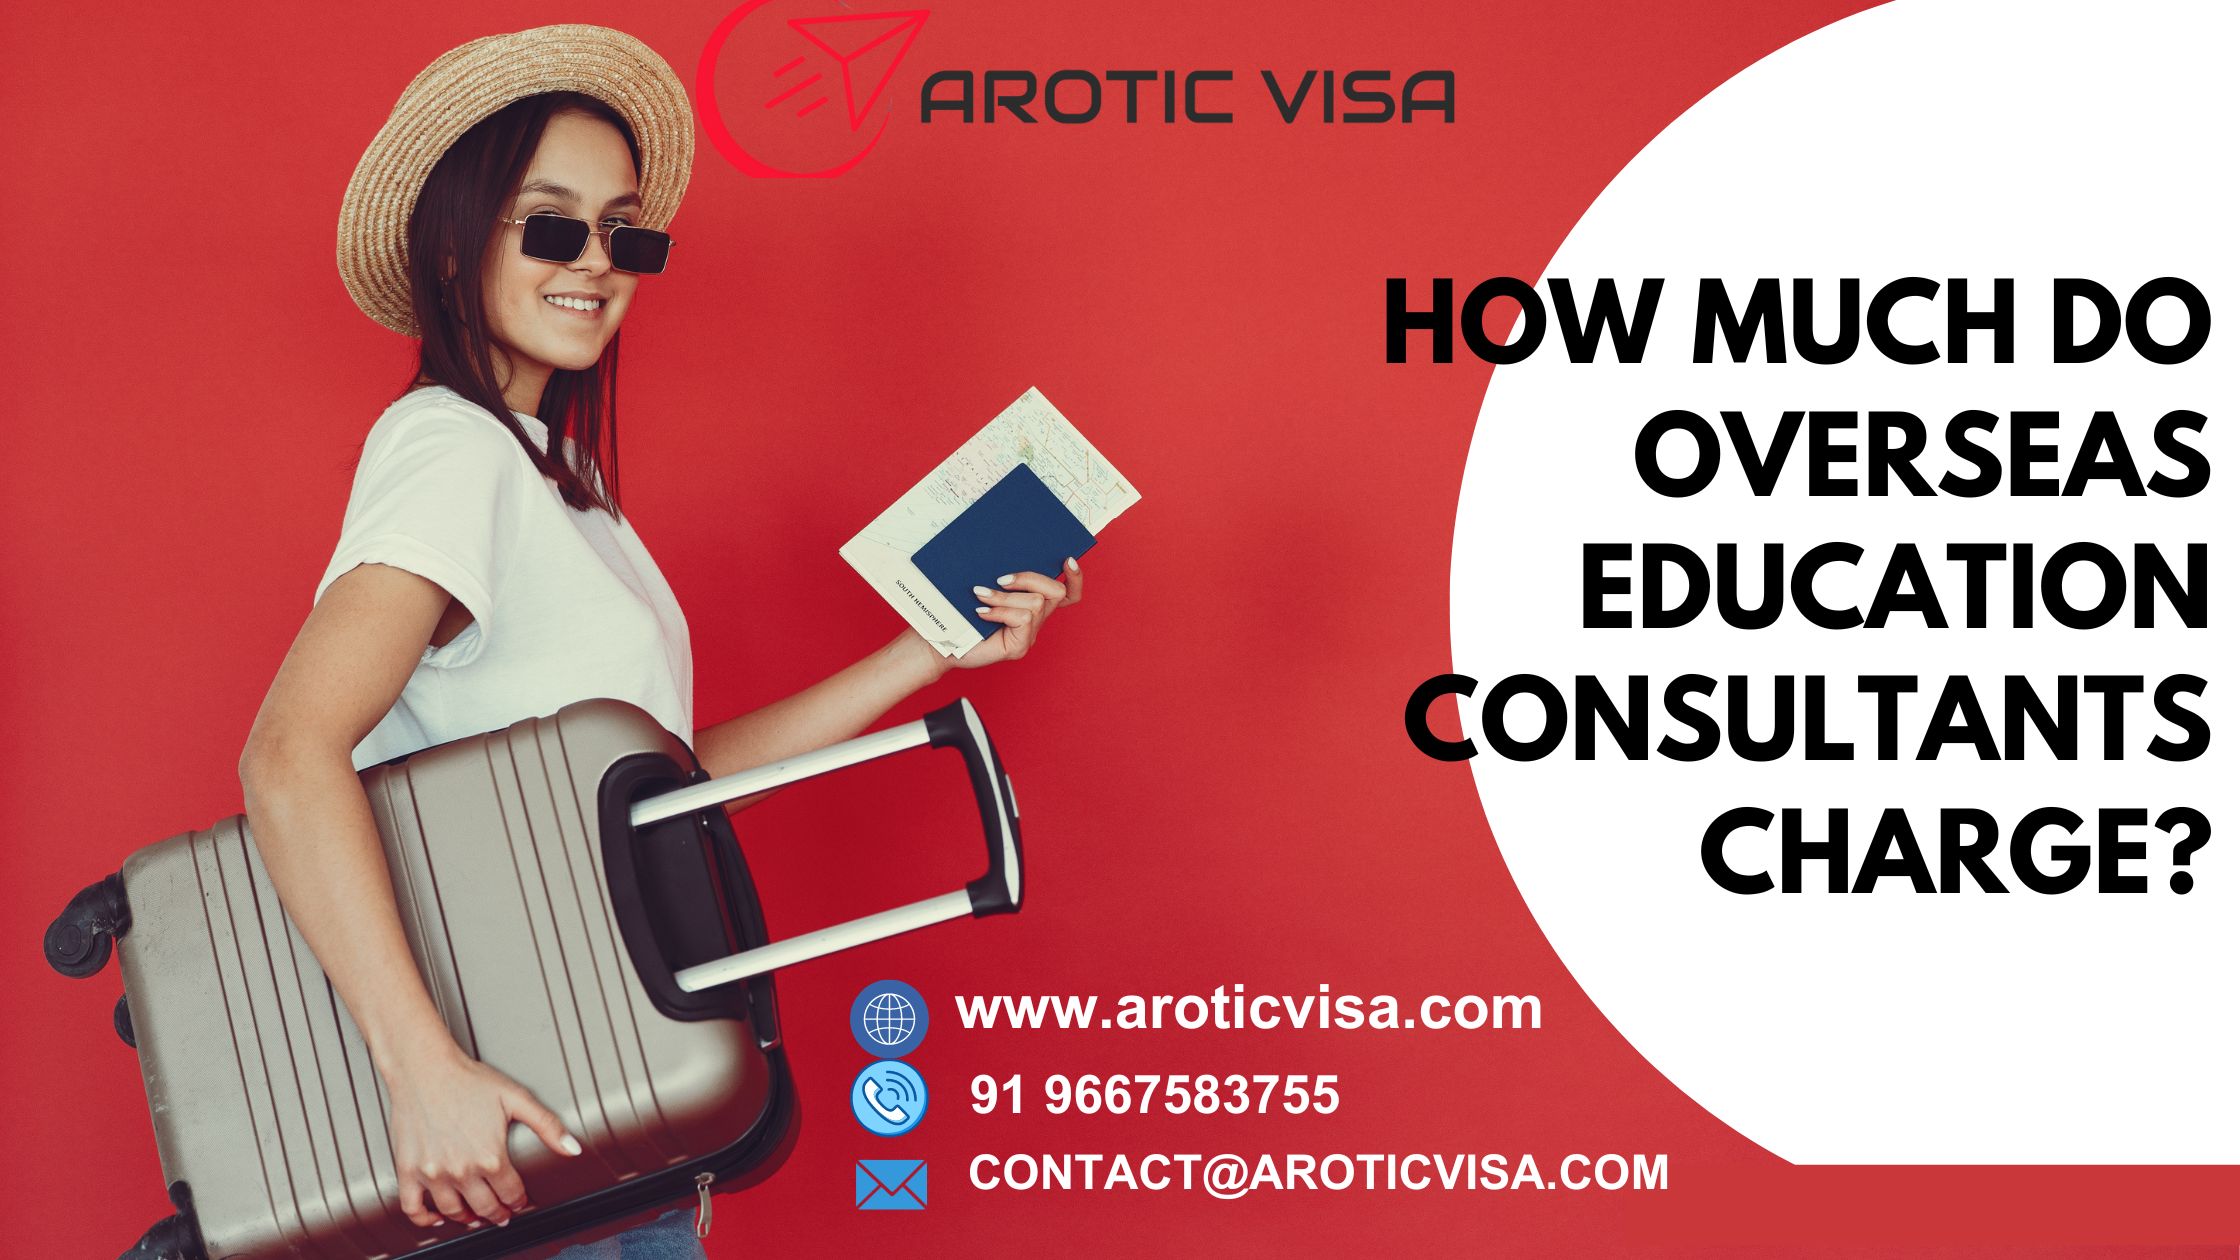 How much do overseas education consultants charge?